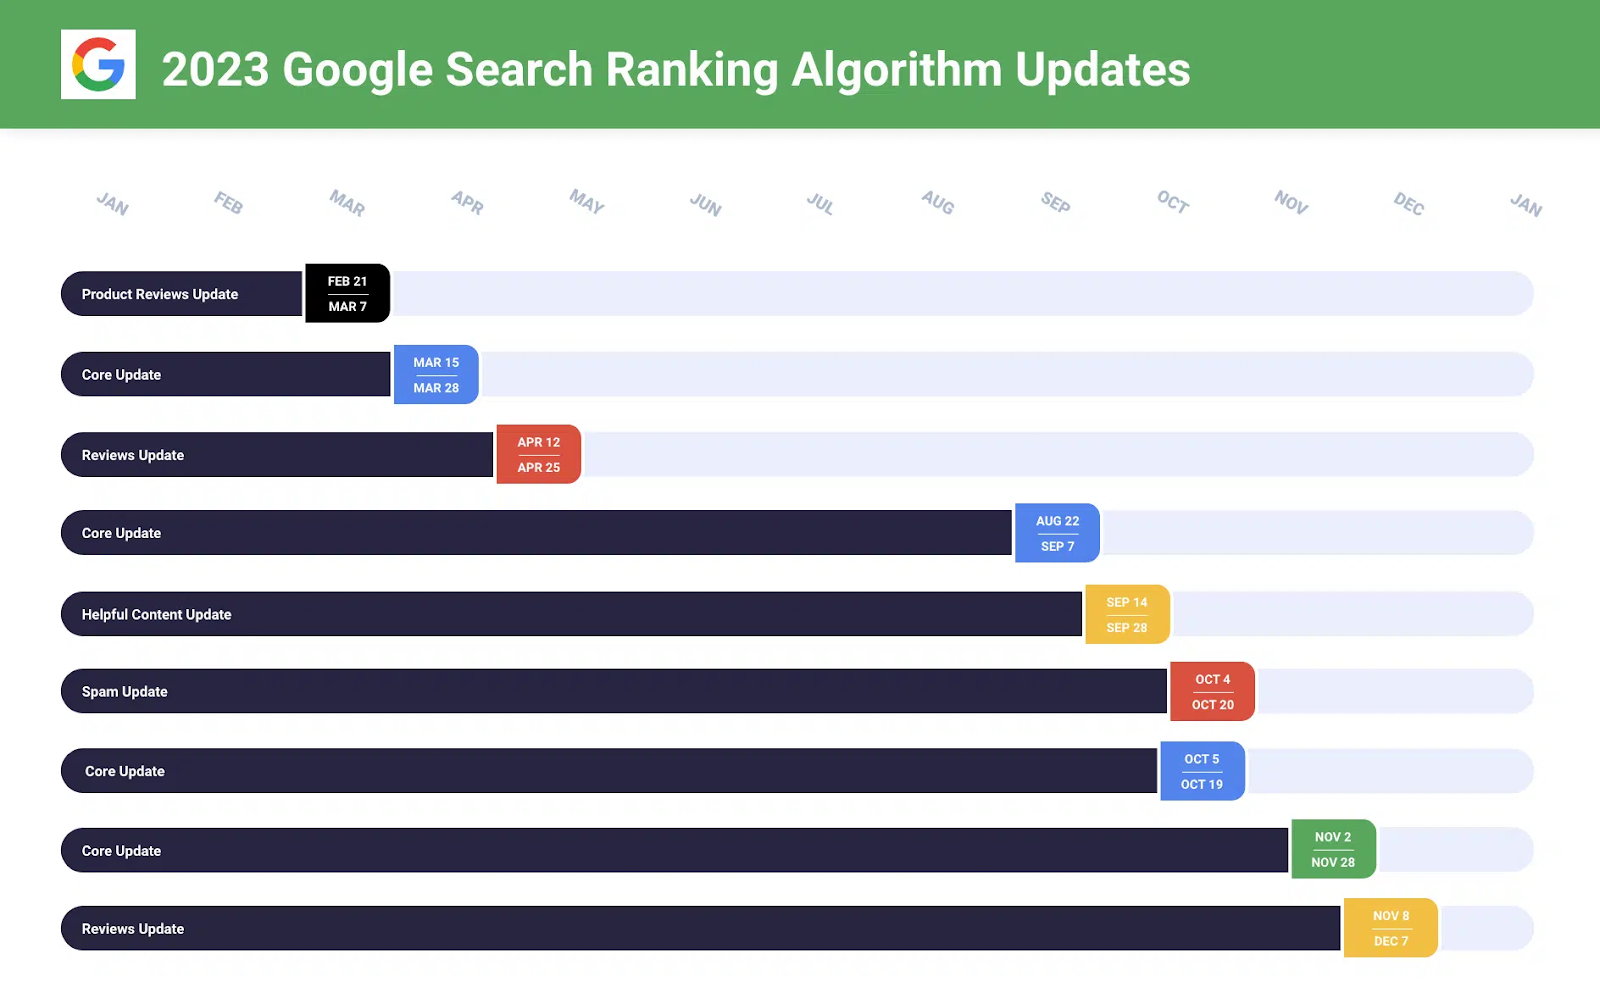 Photo from Search Engine Land mapping out Google Search Ranking Algorithm Updates for 2023